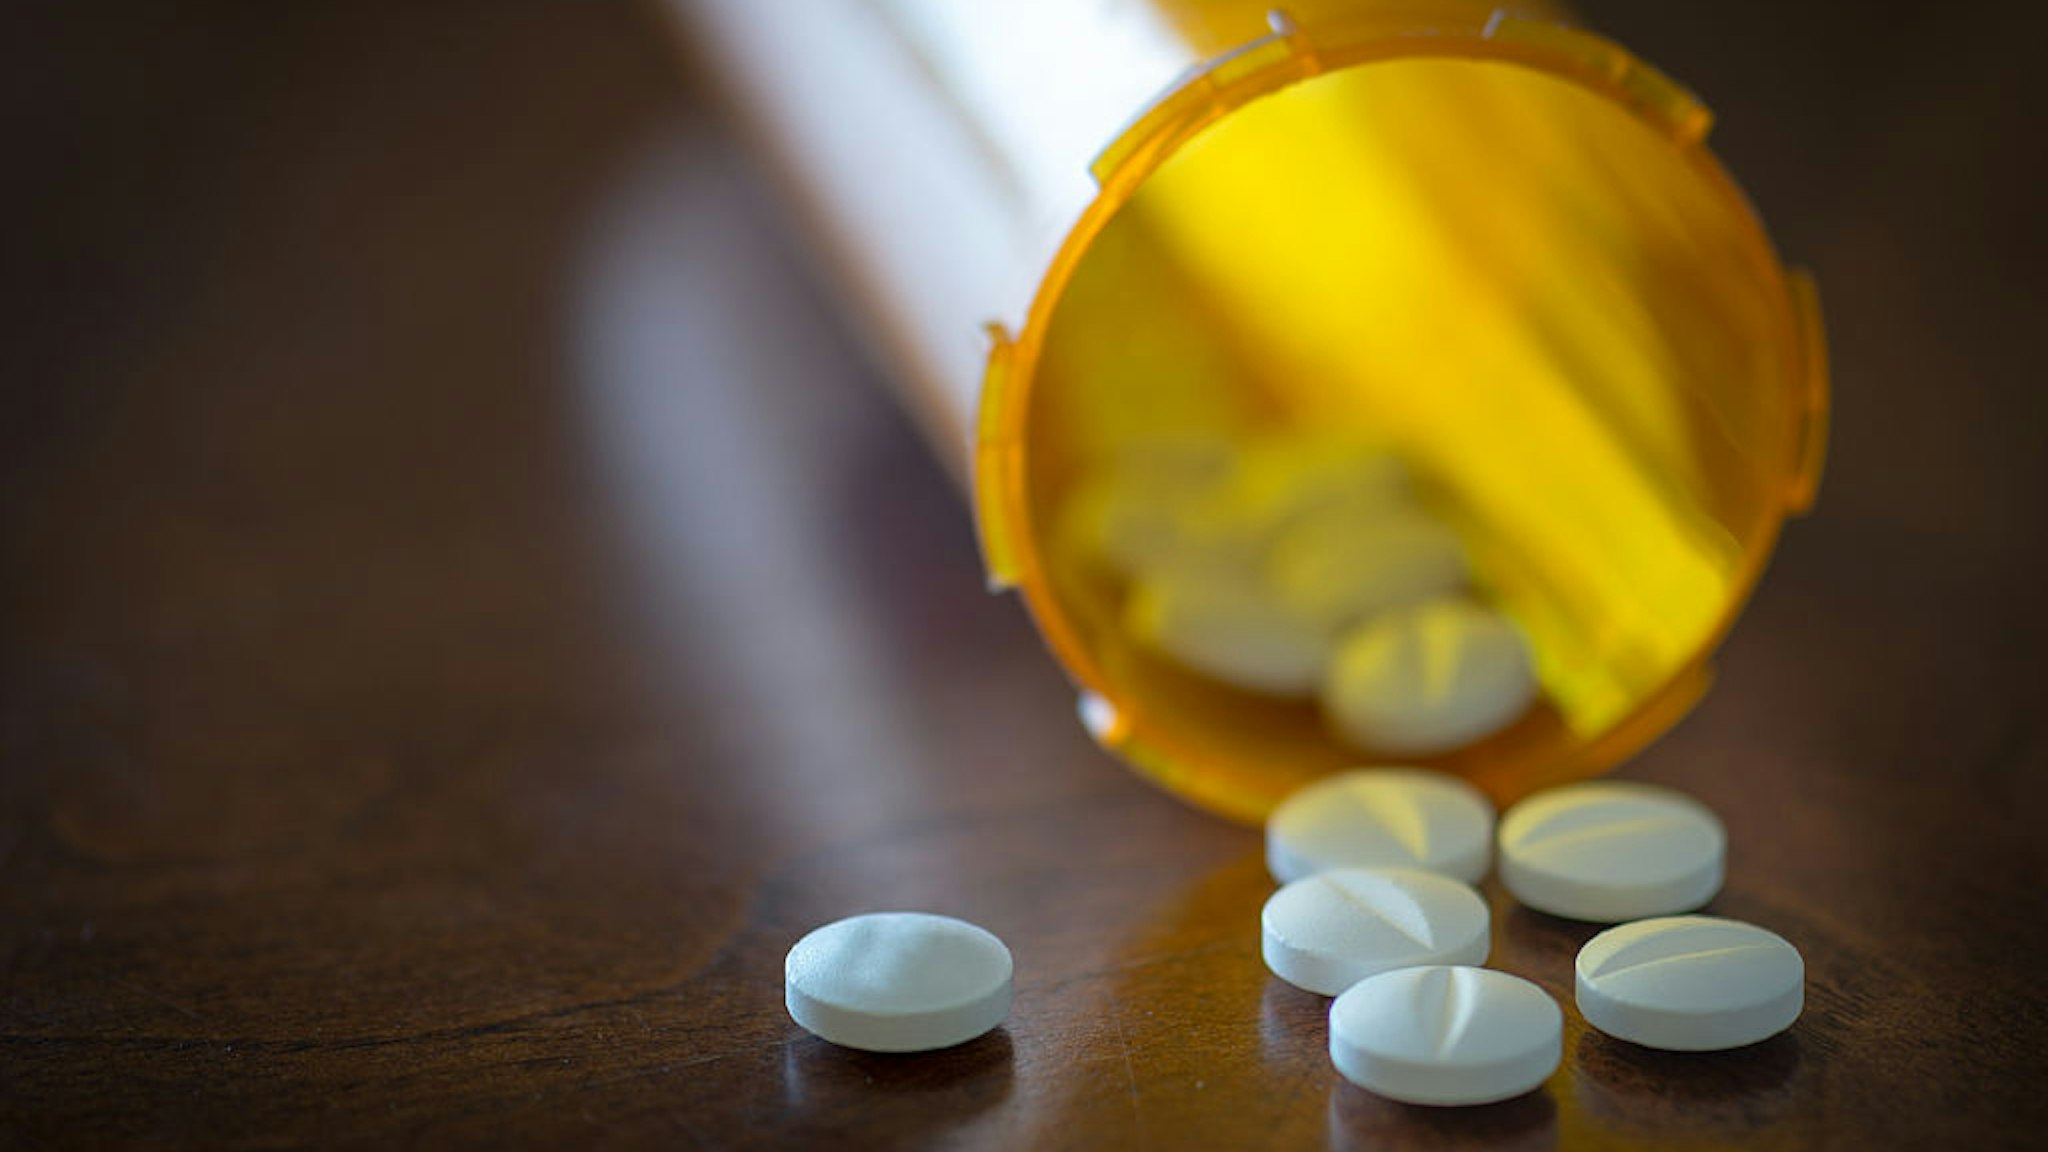 CANADA - 2016/01/21: Prescription pills in a yellow bottle over a wooden table with selective depth of field.